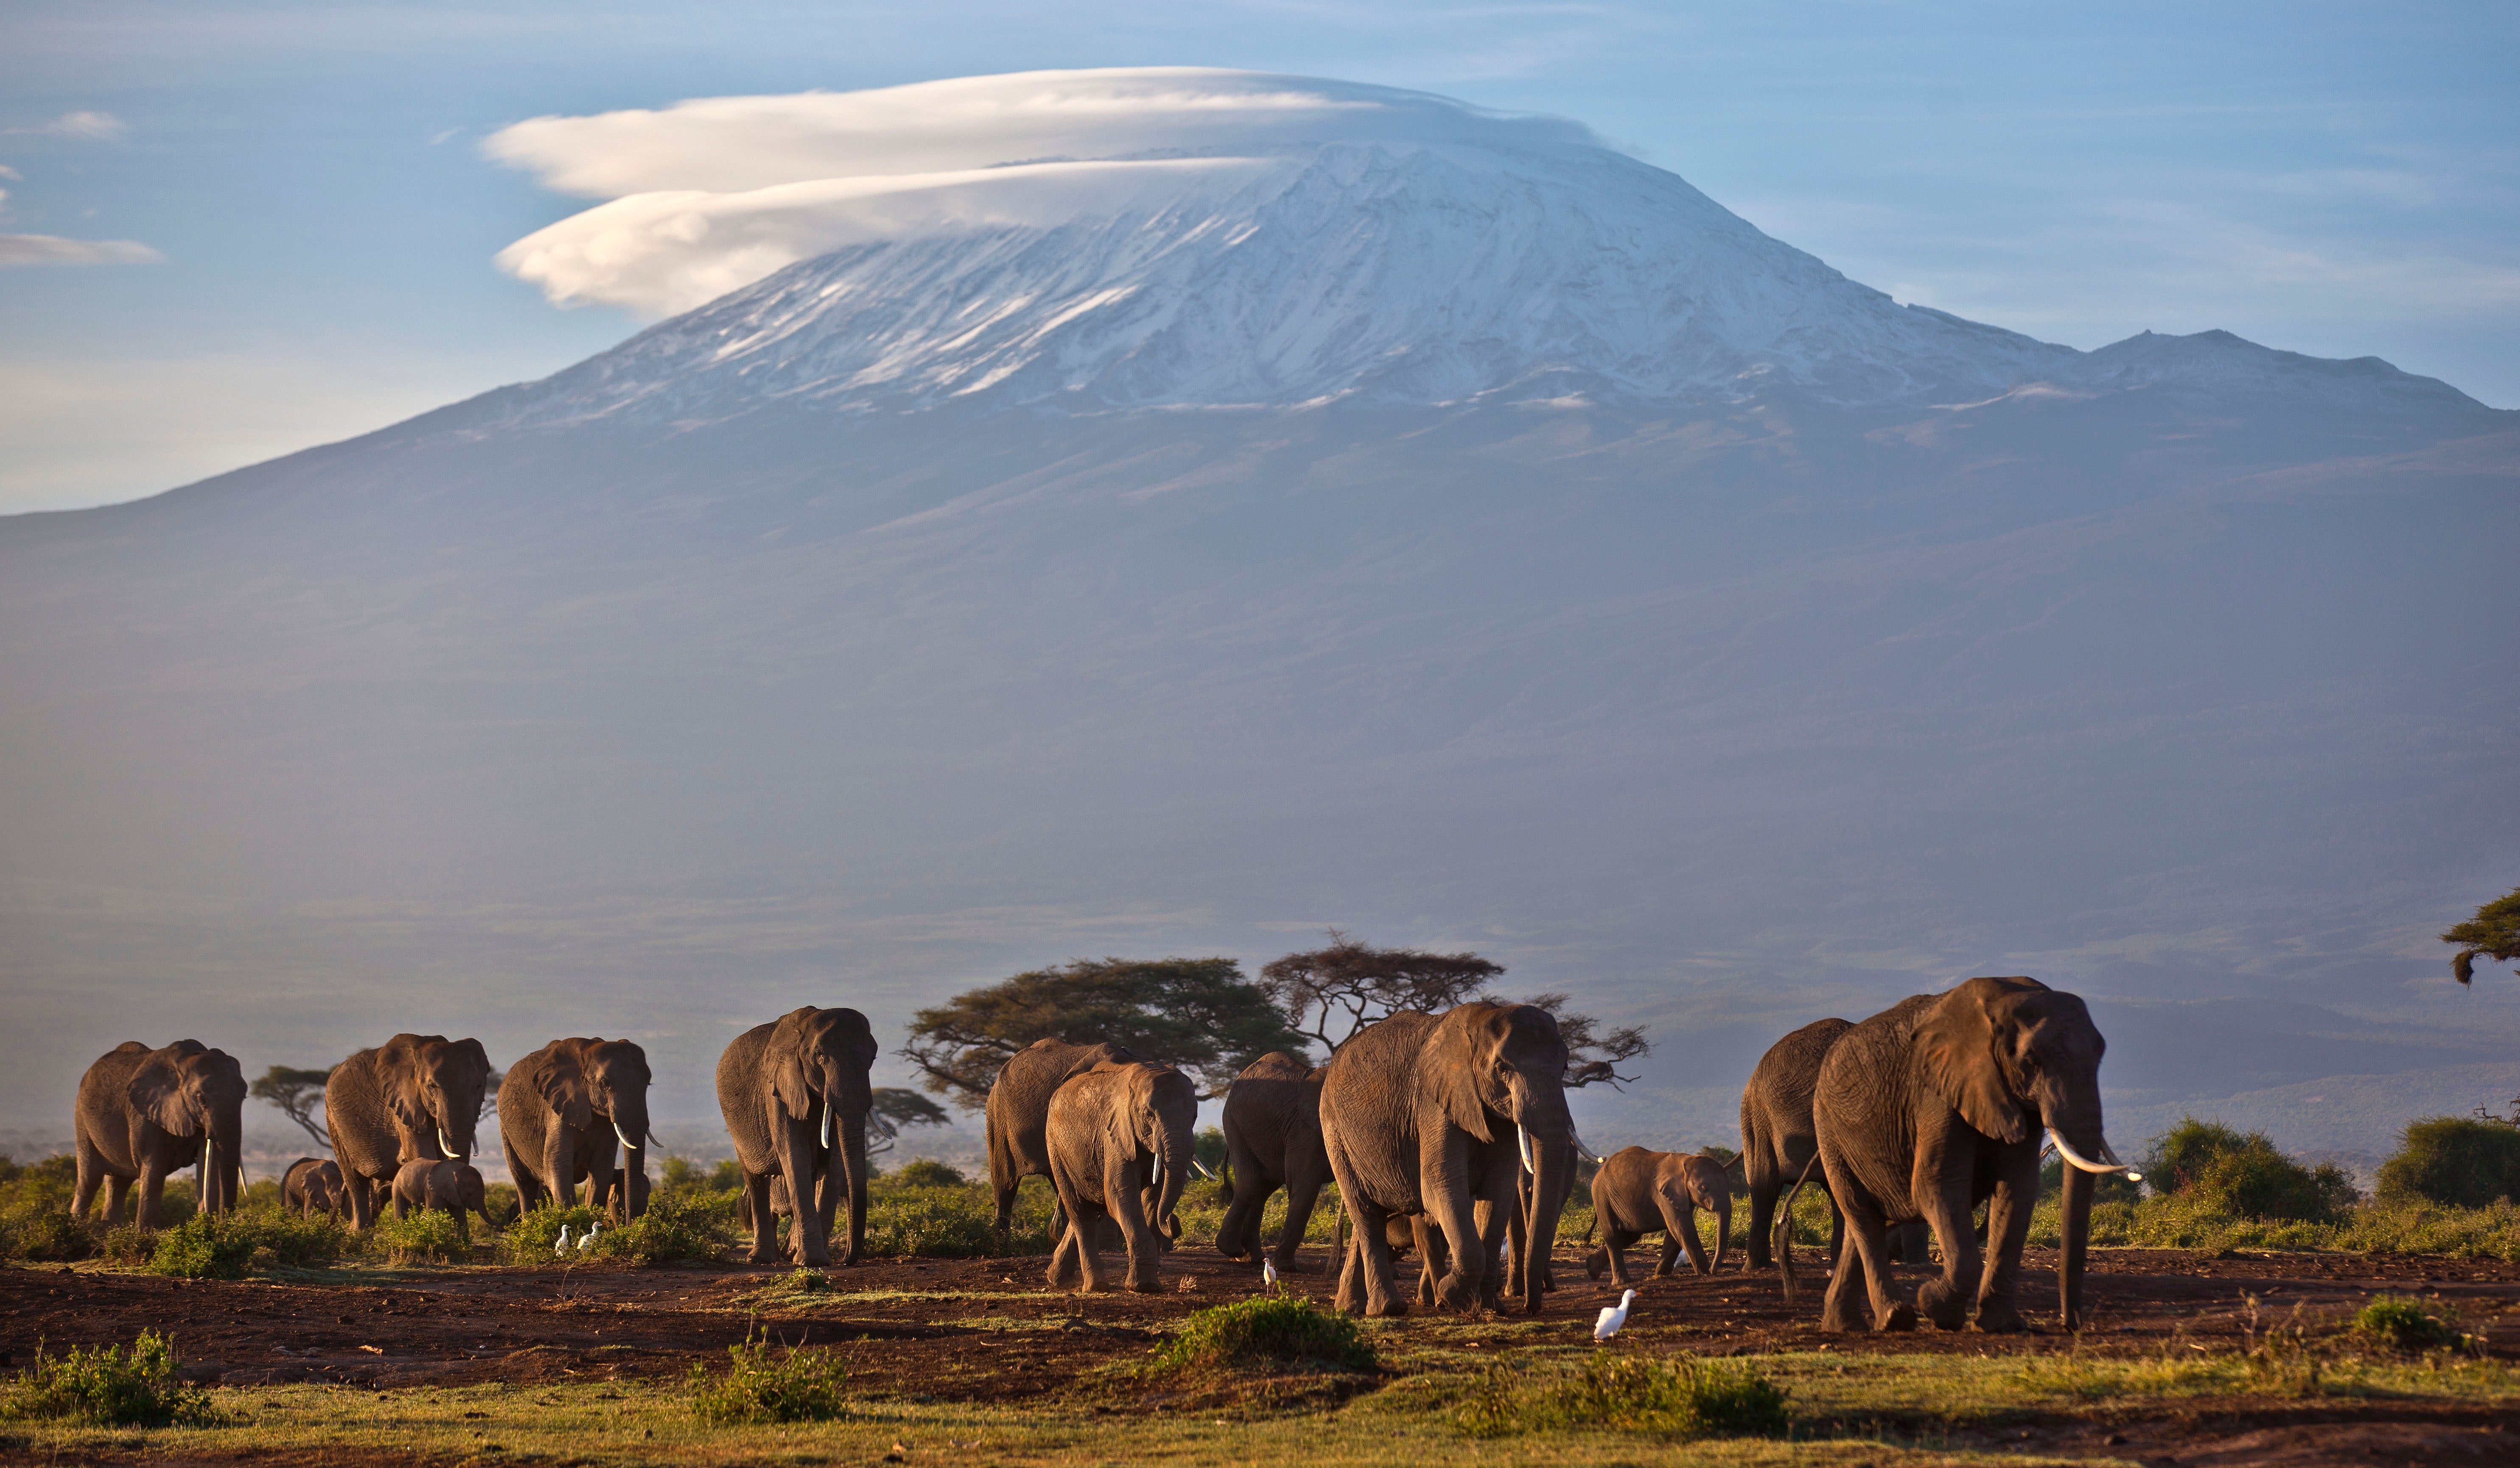 A herd of elephants walk in Amboseli National Park with Mt. Kilimanjaro in the background. (Photo: Ben Curtis, AP)